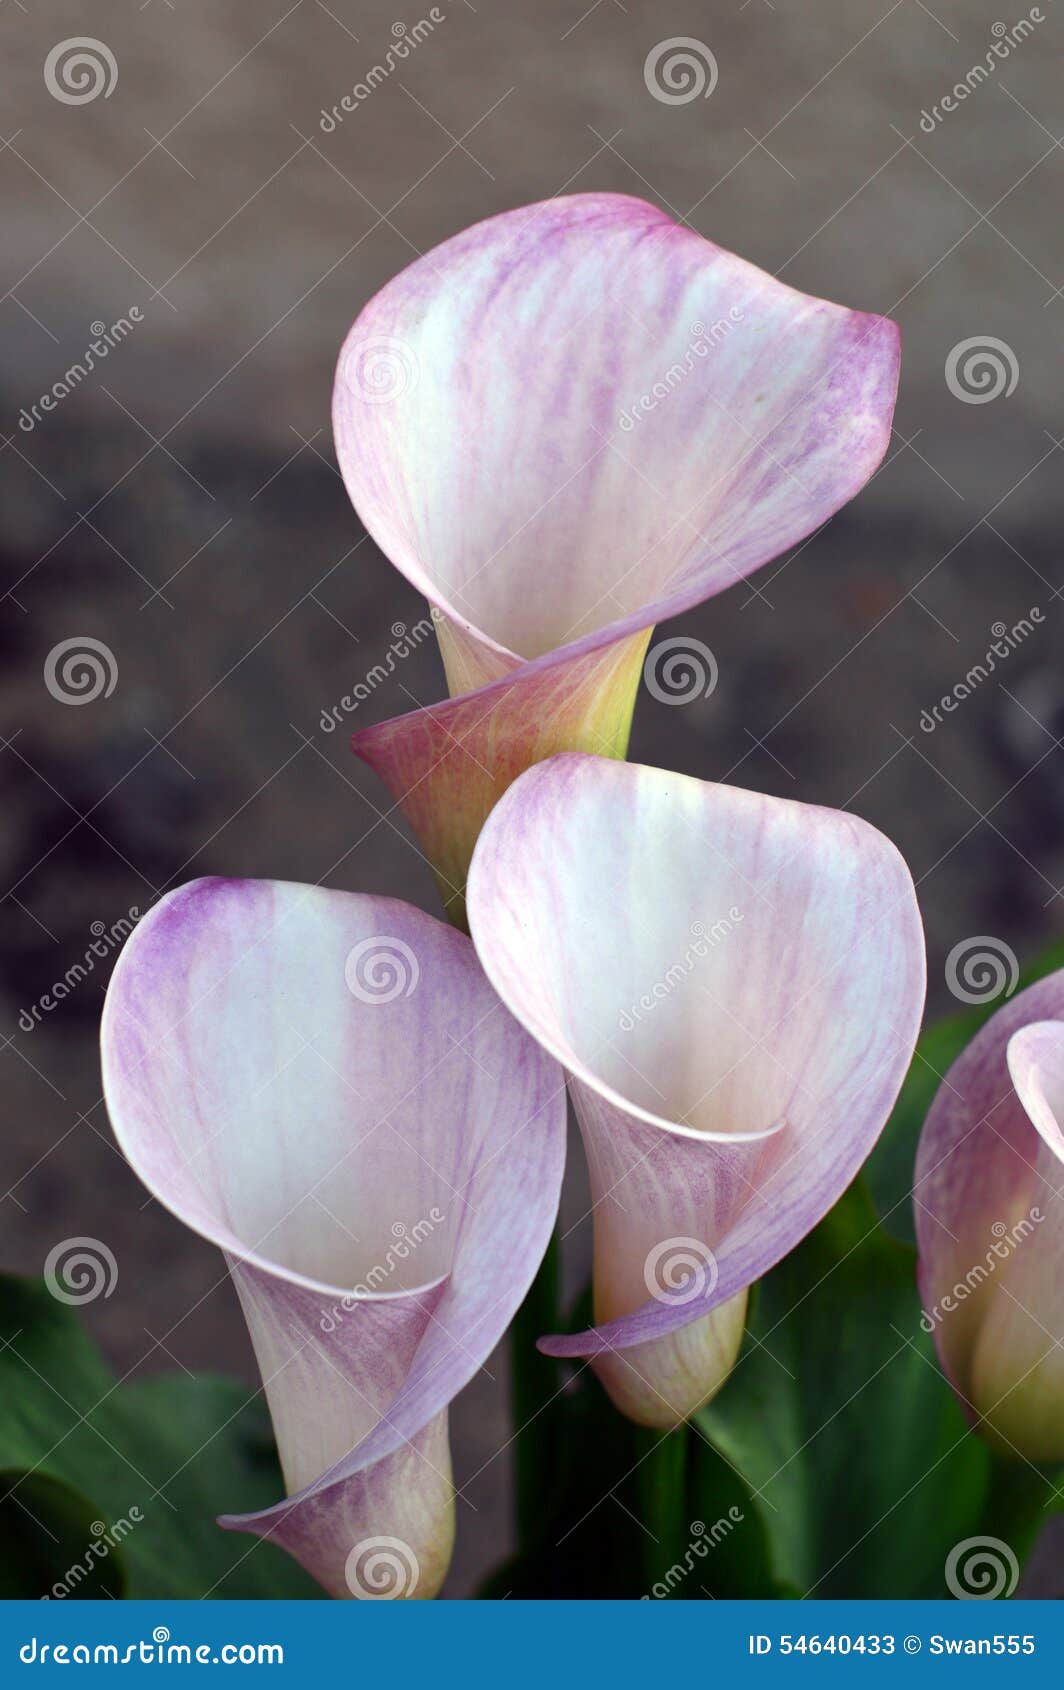 Calla Lily Flowers stock image. Image of arum, curl, natural - 54640433